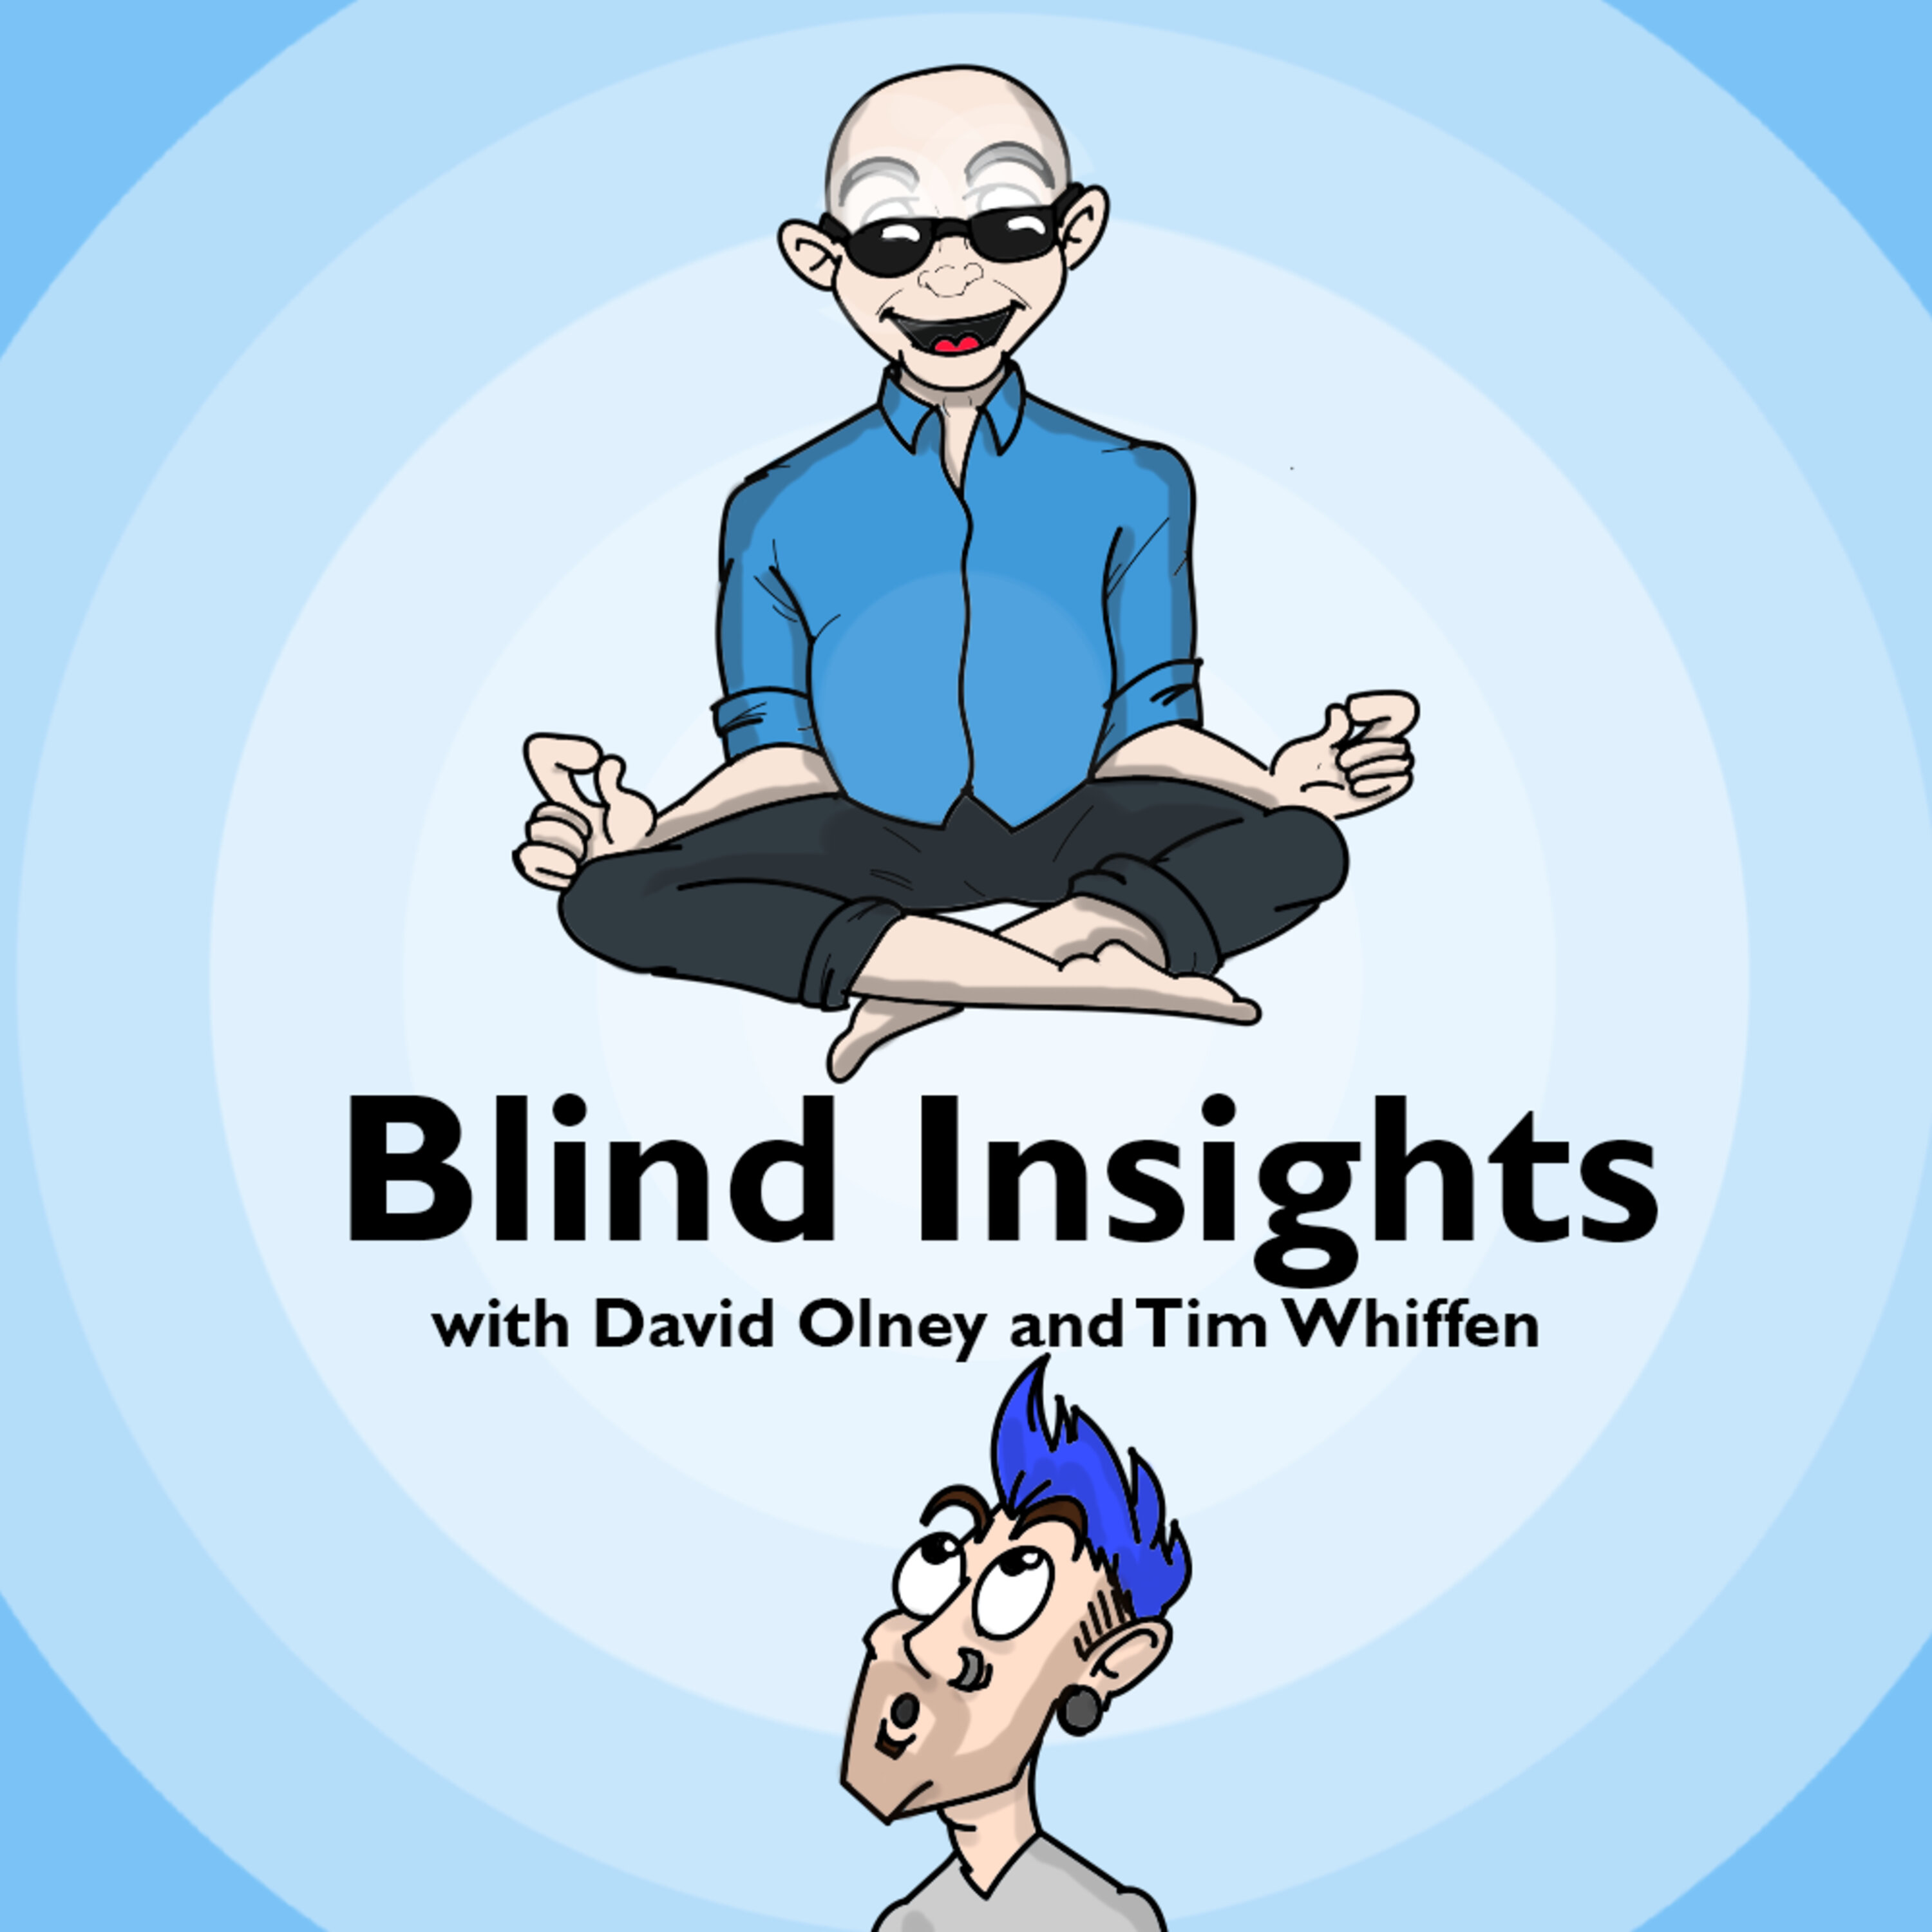 Blind Insights - The True Meaning of Christmas